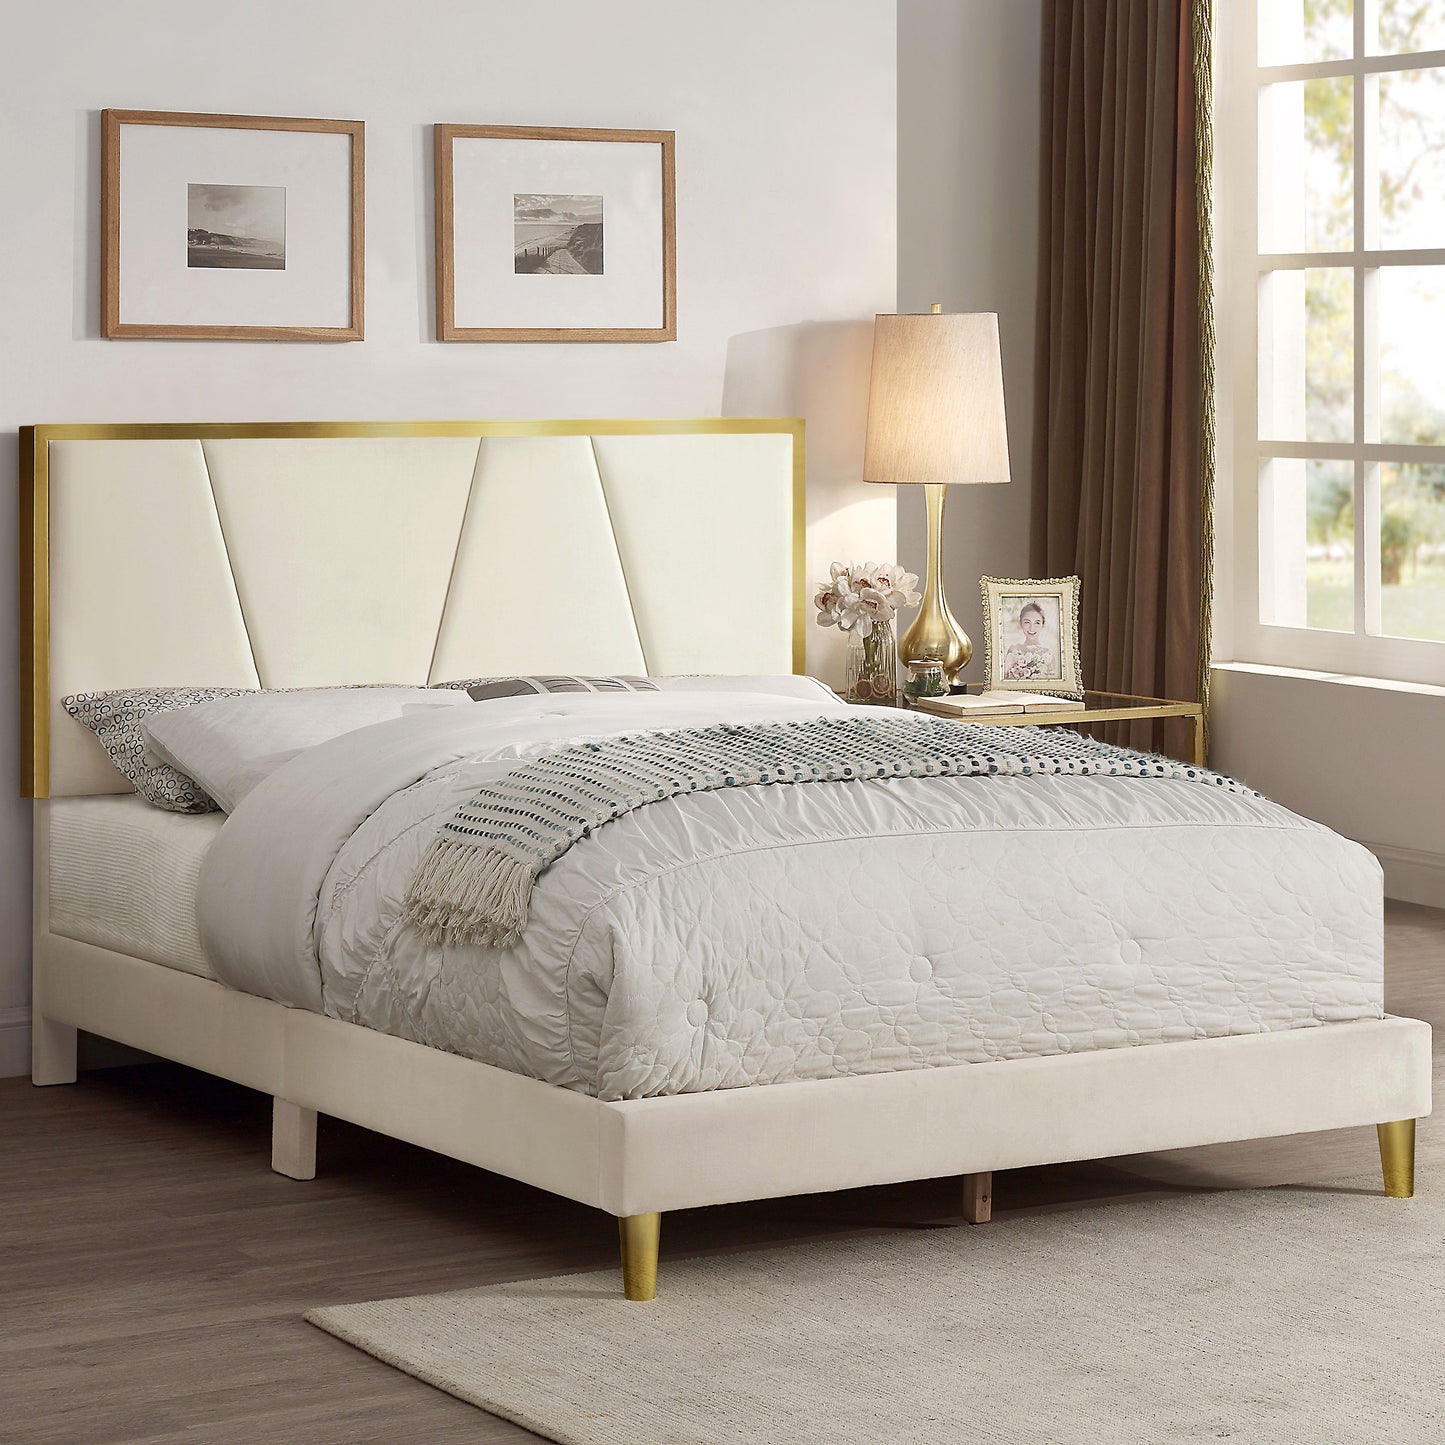 Right angled contemporary beige and gold upholstered eastern king bed in a bedroom with accessories